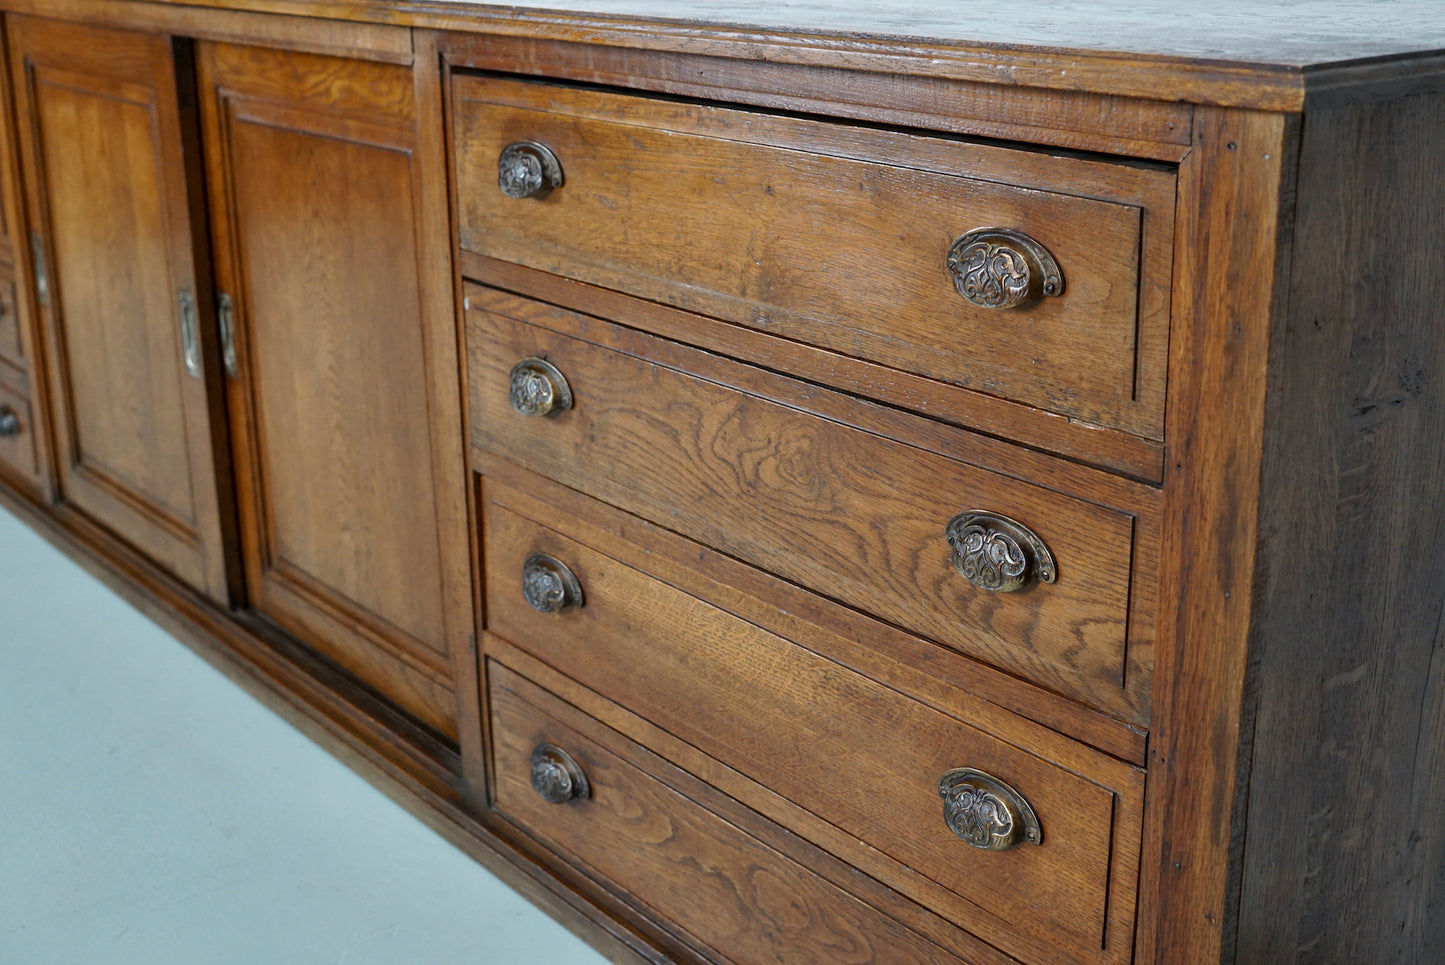 Large Antique French Oak Apothecary Cabinet or Sideboard, Circa 1900